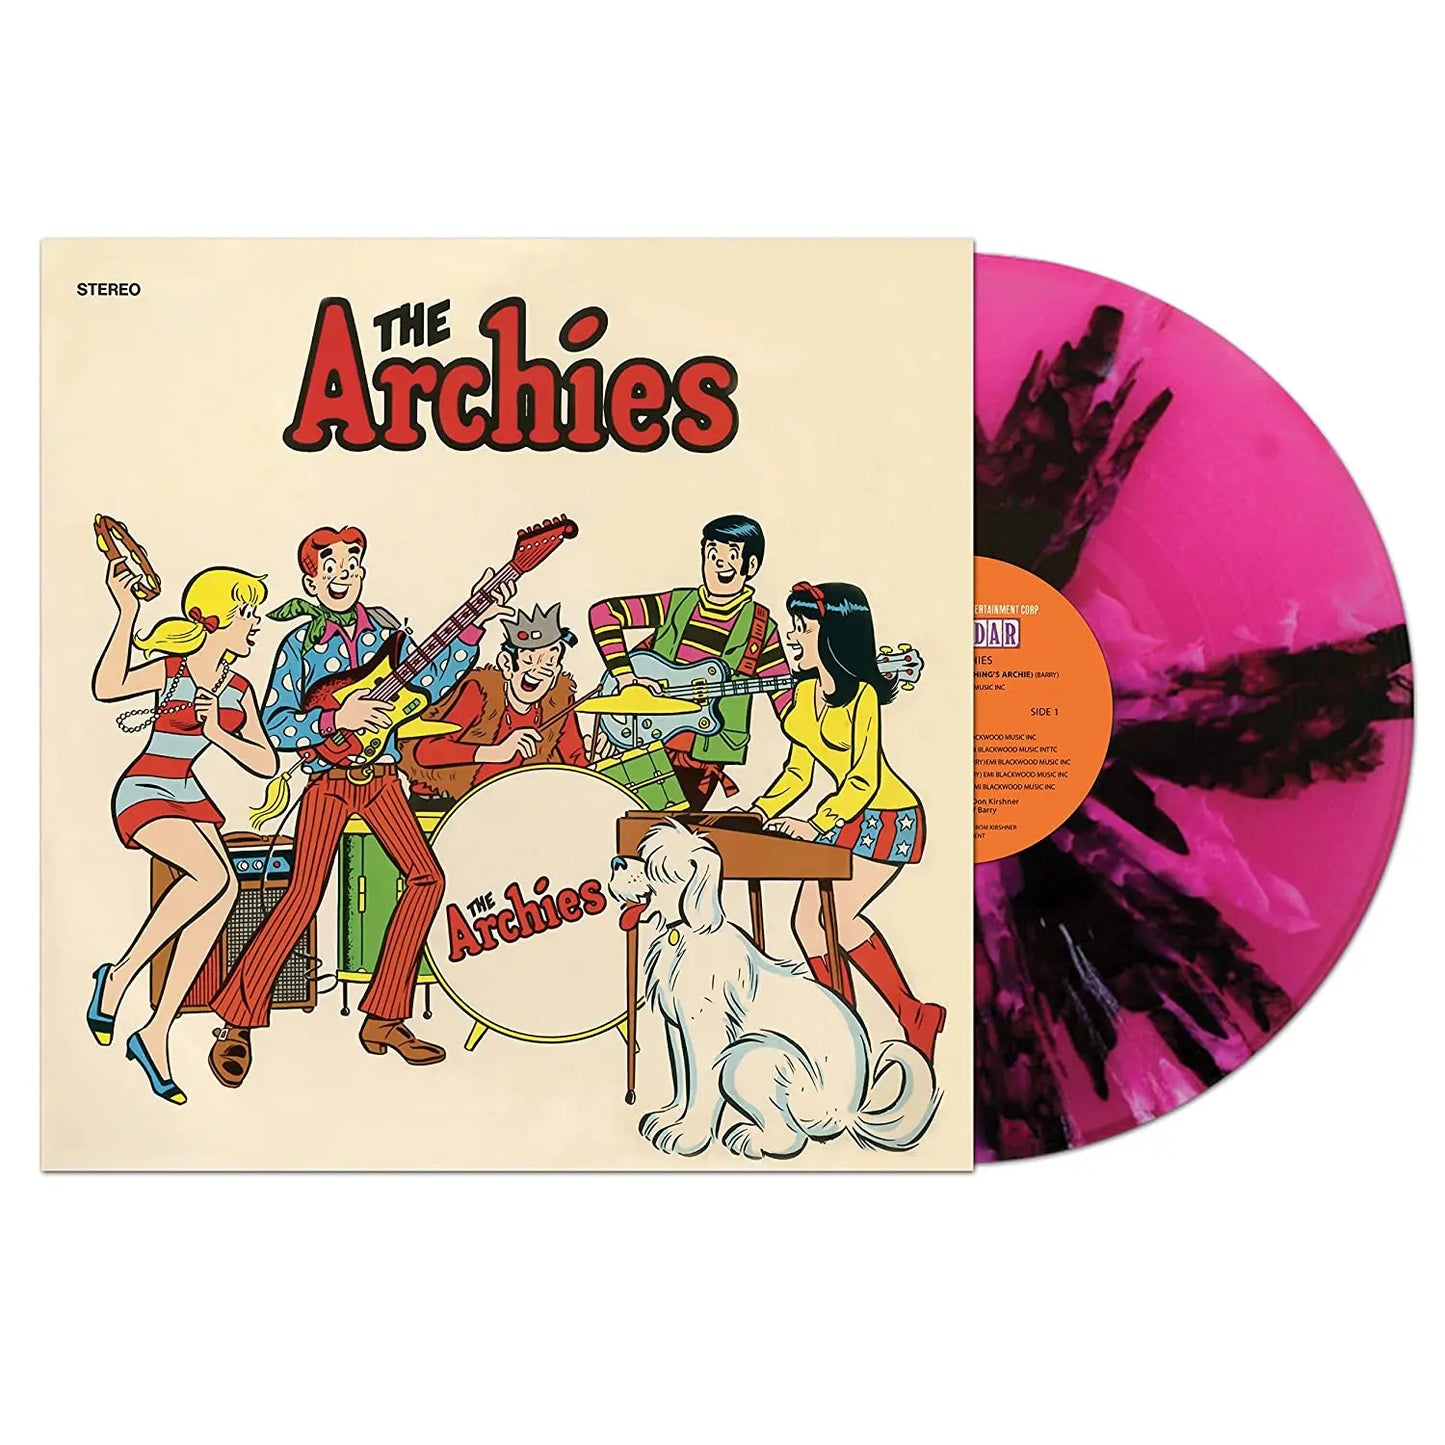 The Archies - Archies [Colored Vinyl, Black, Pink, White, Limited Edition]